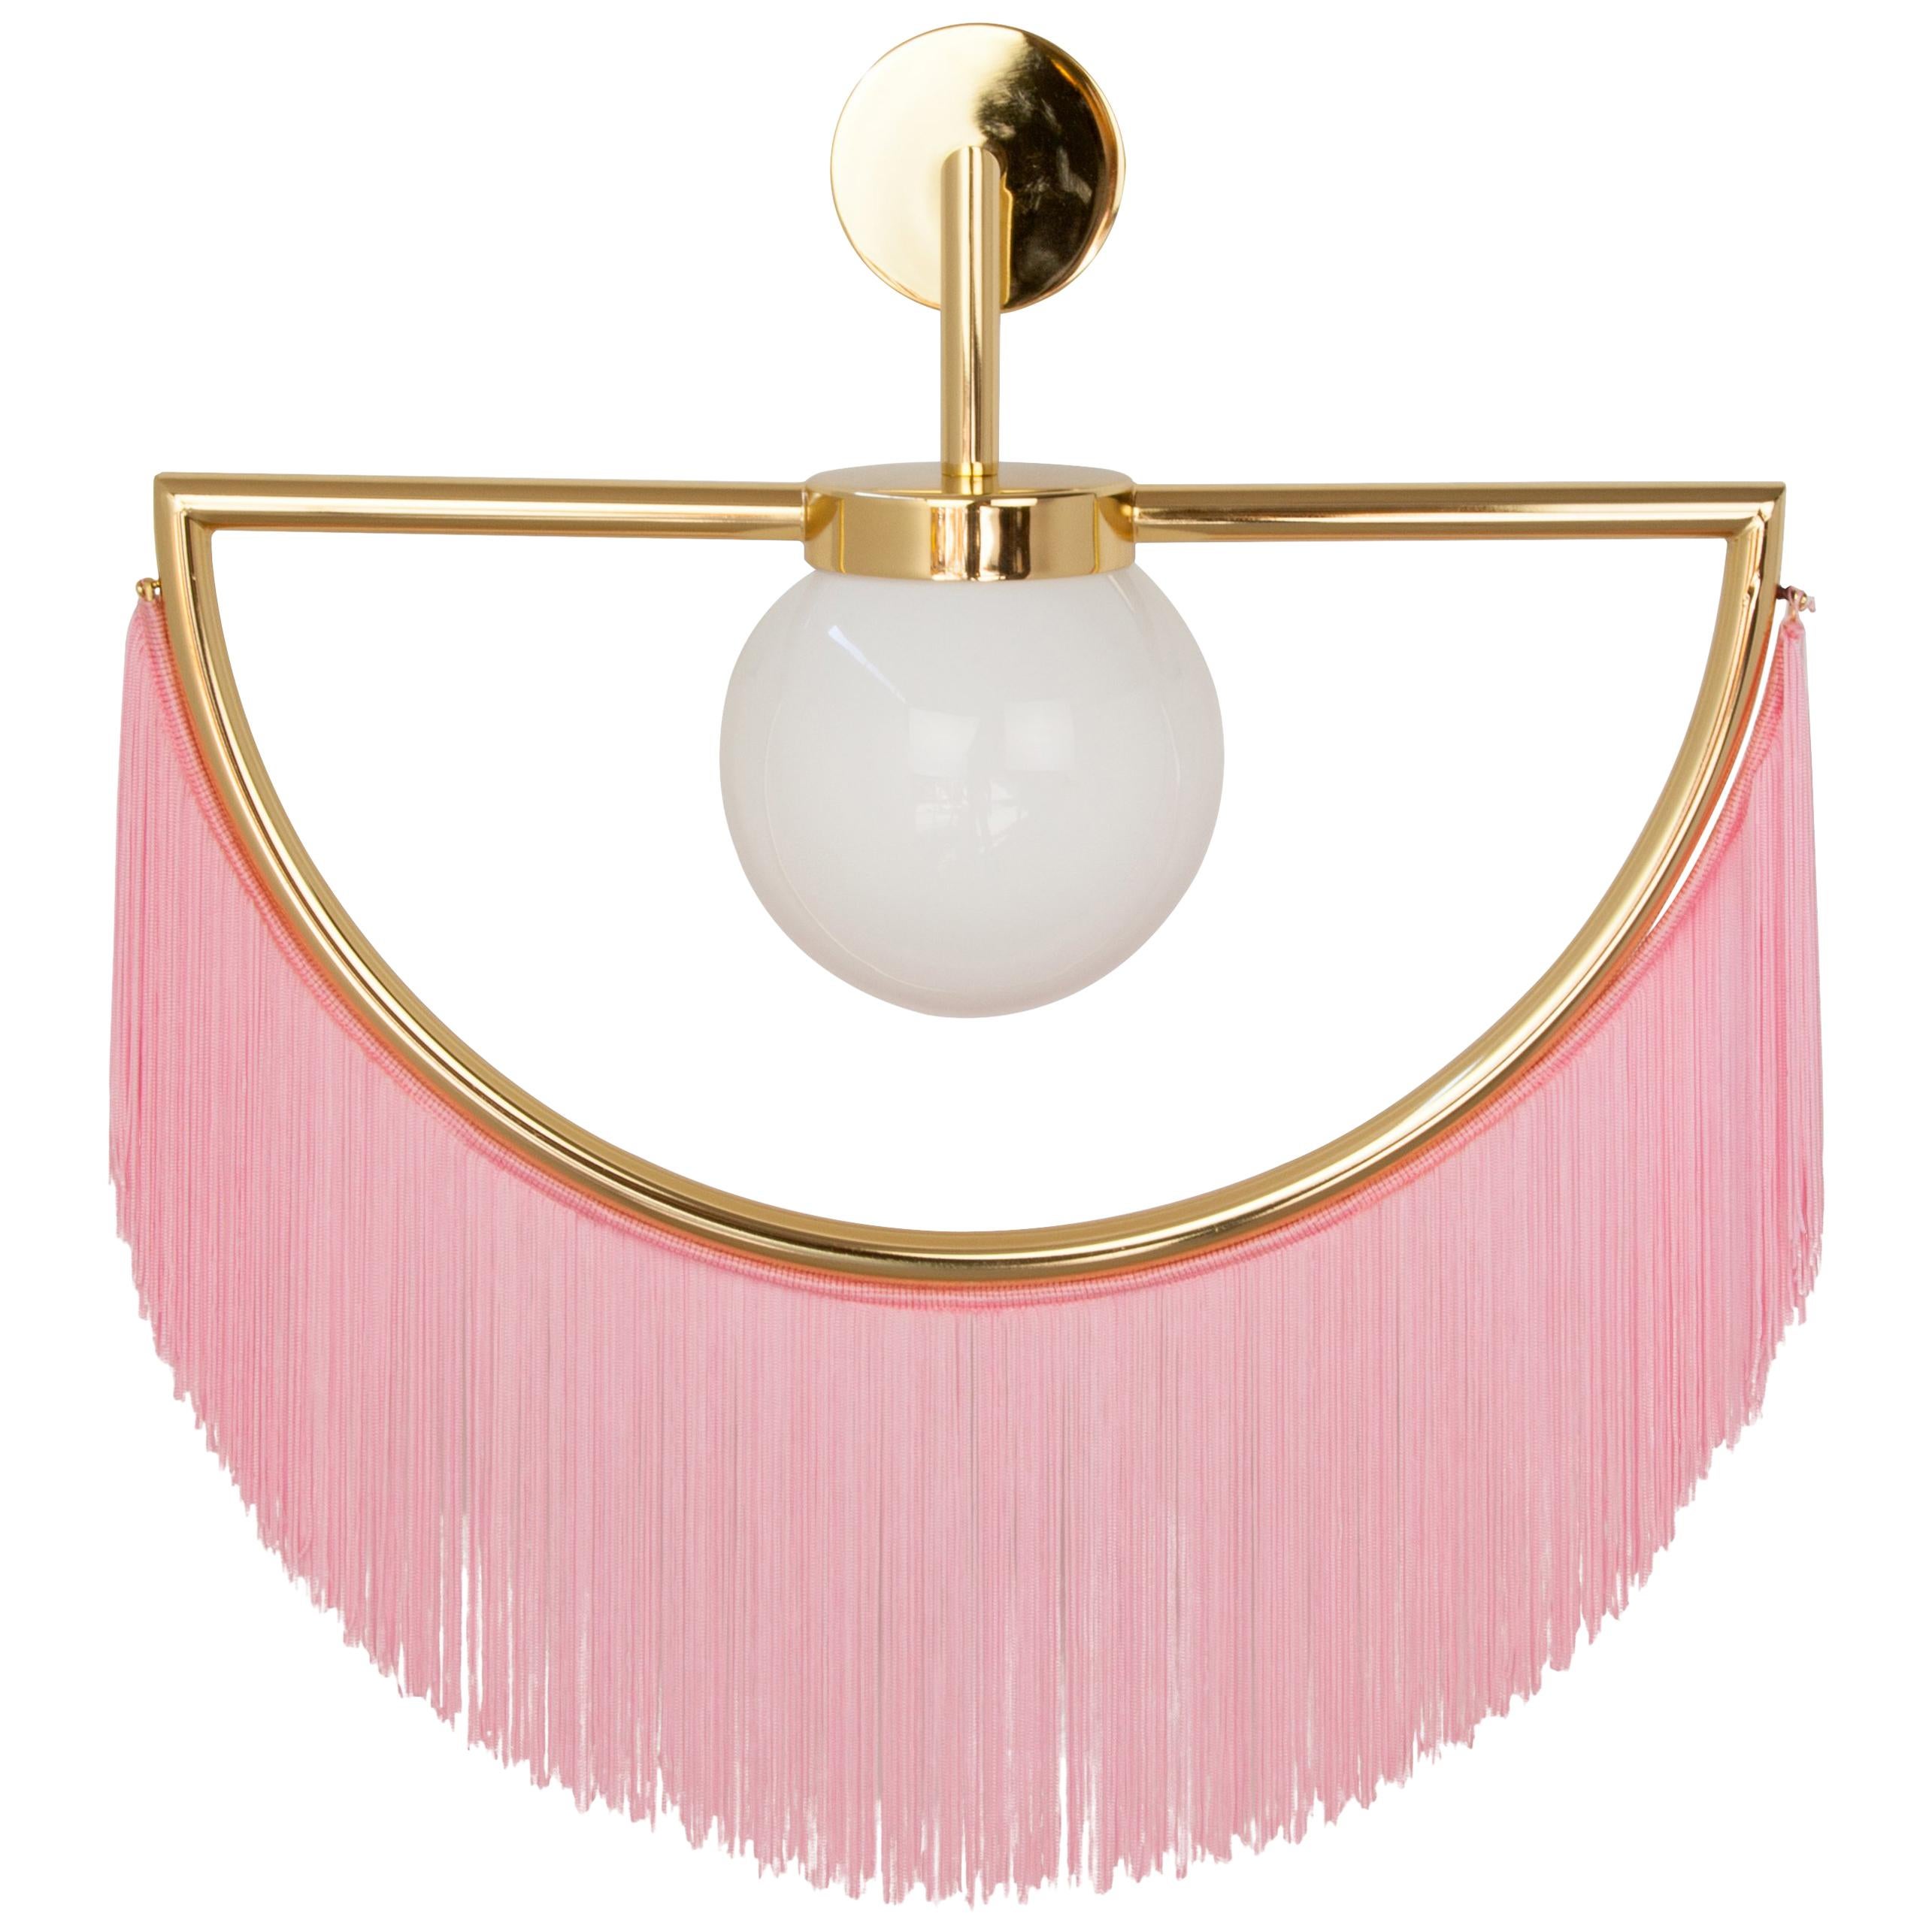 Wink Gold-Plated Wall Lamp with Pink Fringes For Sale